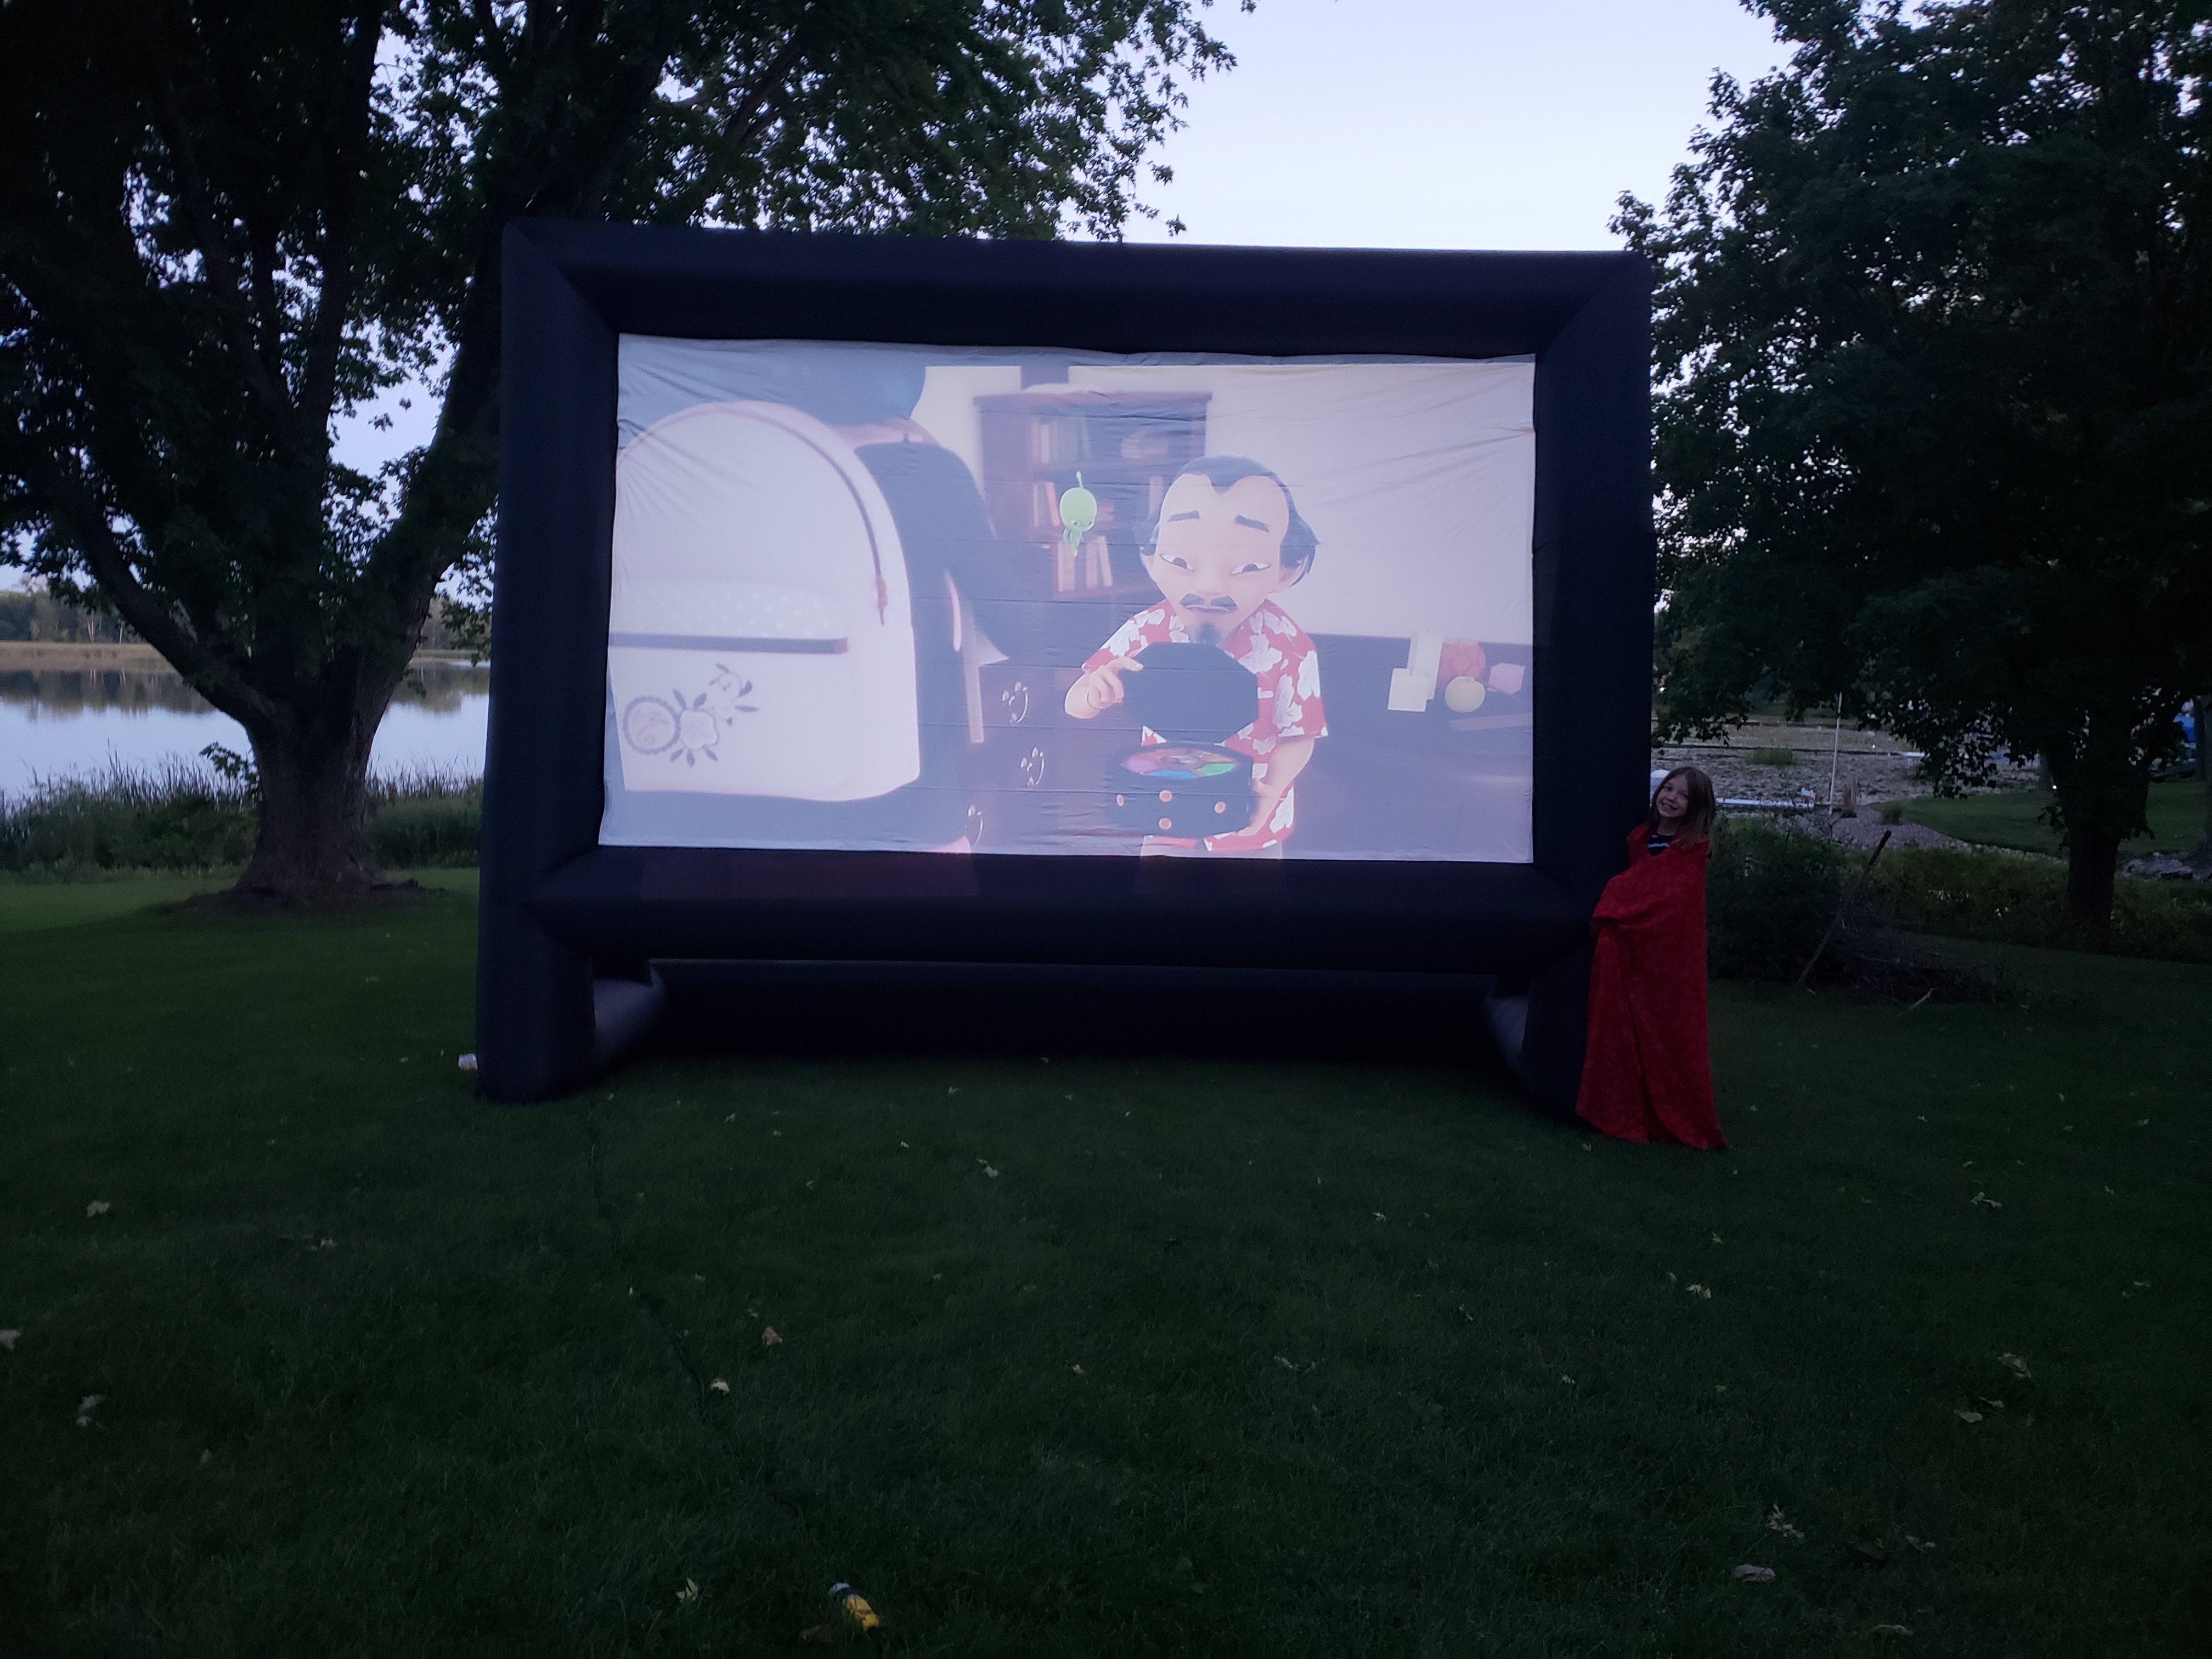 Our daughter Lily standing by the blow-up screen during our test-run at the lake this past Sunday.